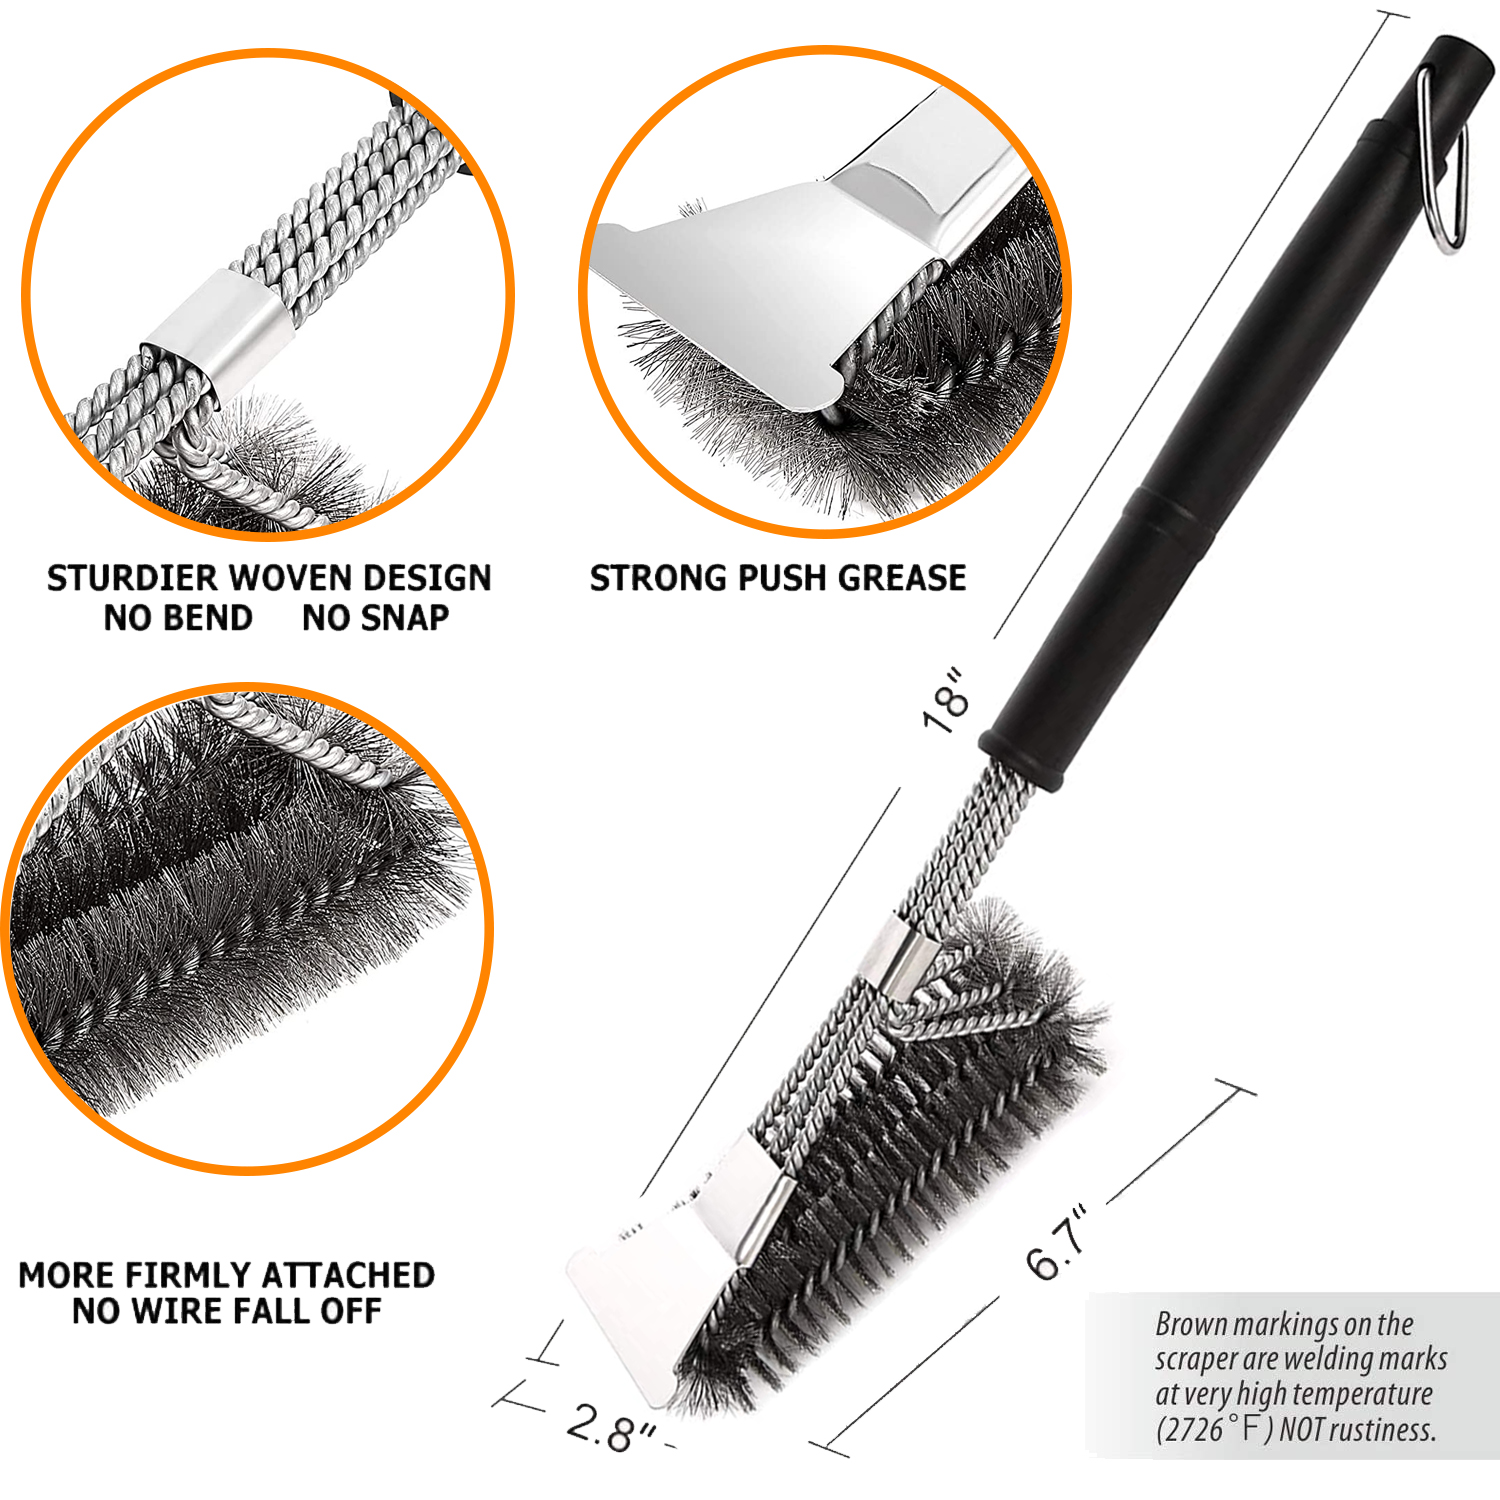 Grill Cleaning Brush and Scraper, Extra Strong BBQ Grill Cleaner  Accessories, Safe Wire Bristles 18 Barbecue Brush for Grill Grates